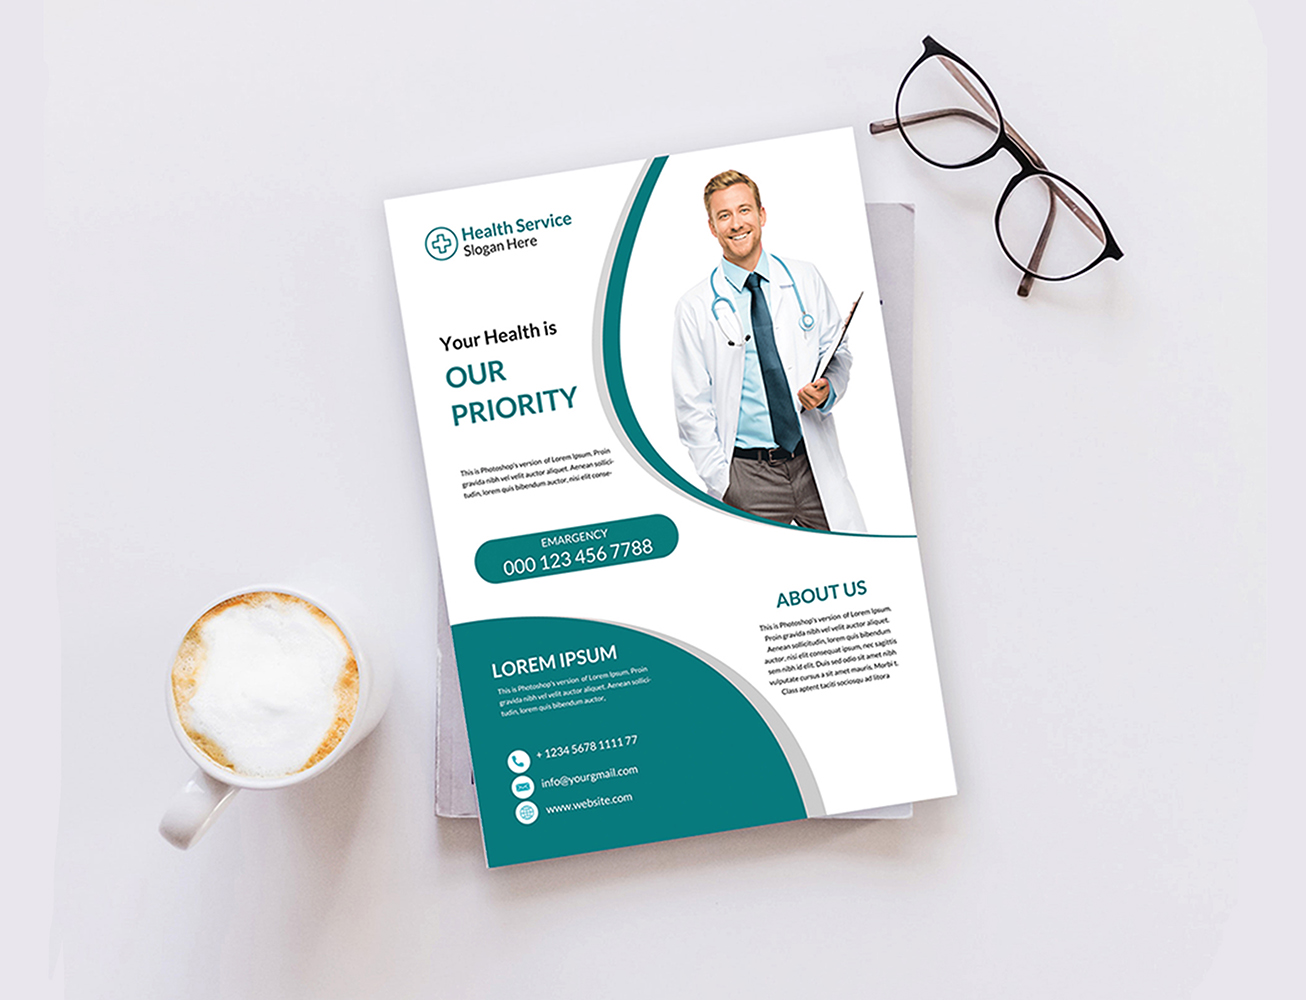 Medical Flyer Design Corporate identity template